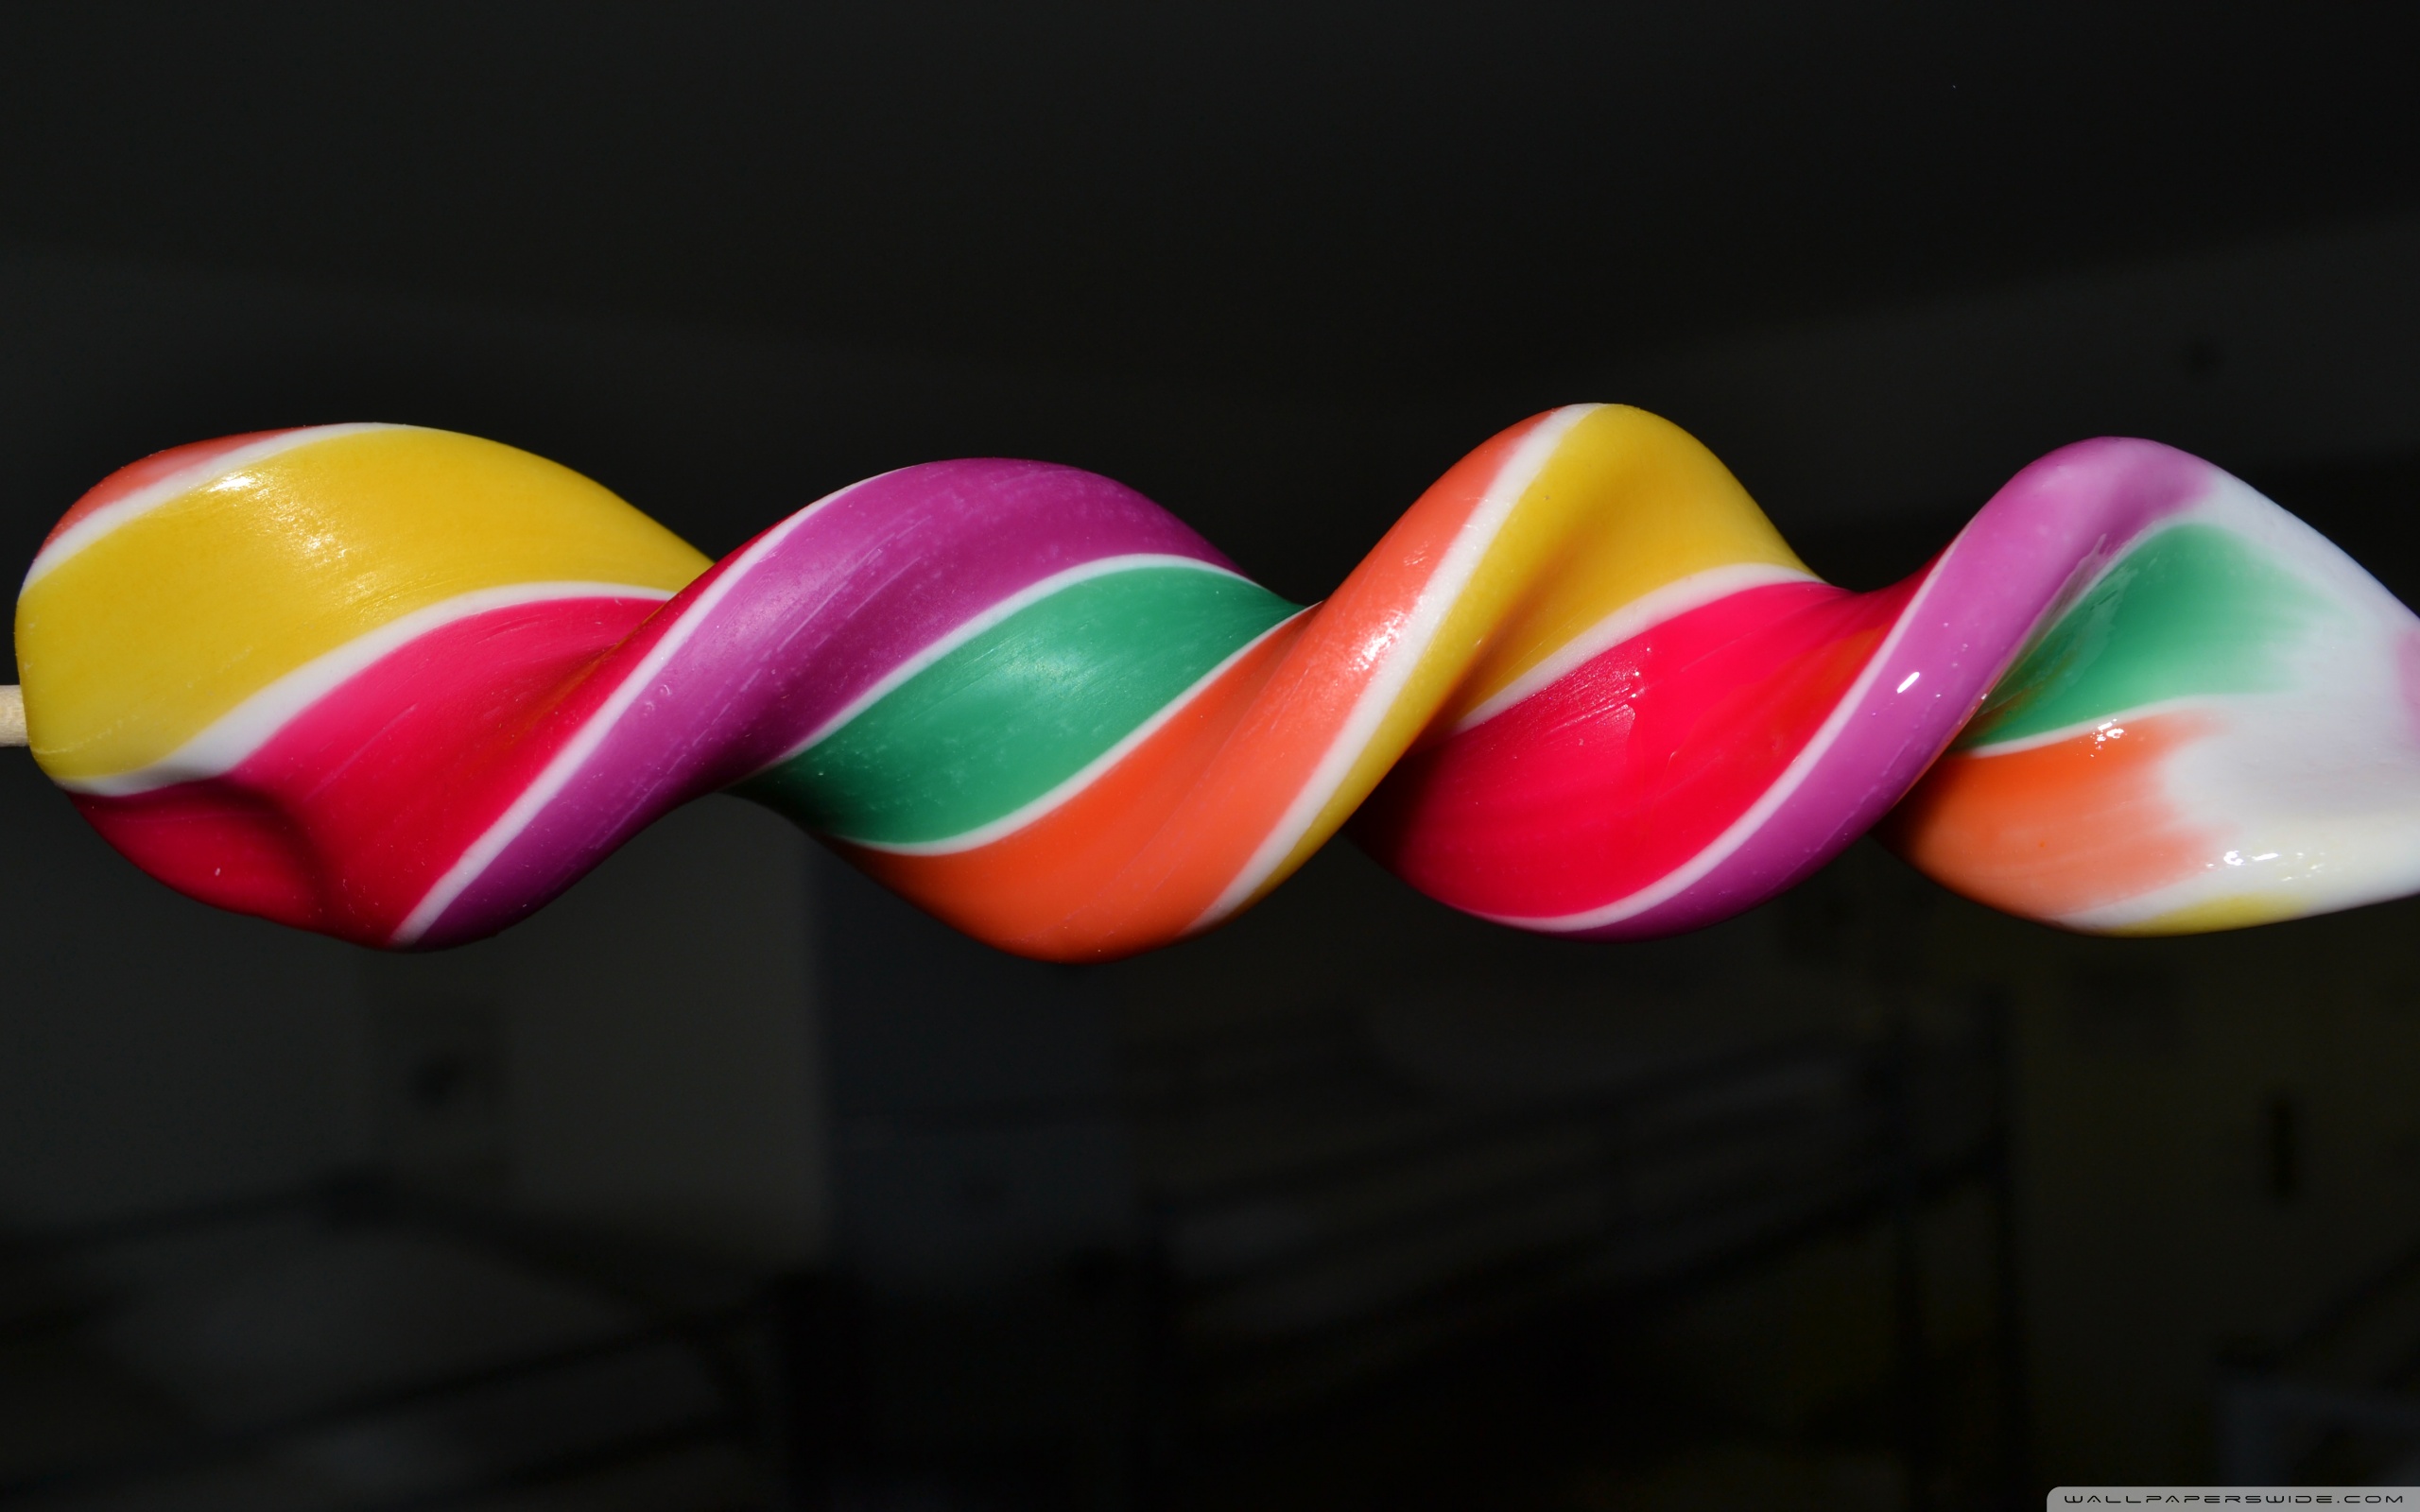 Weekly Wallpaper: Celebrate Android L With These Lollipop Wallpapers